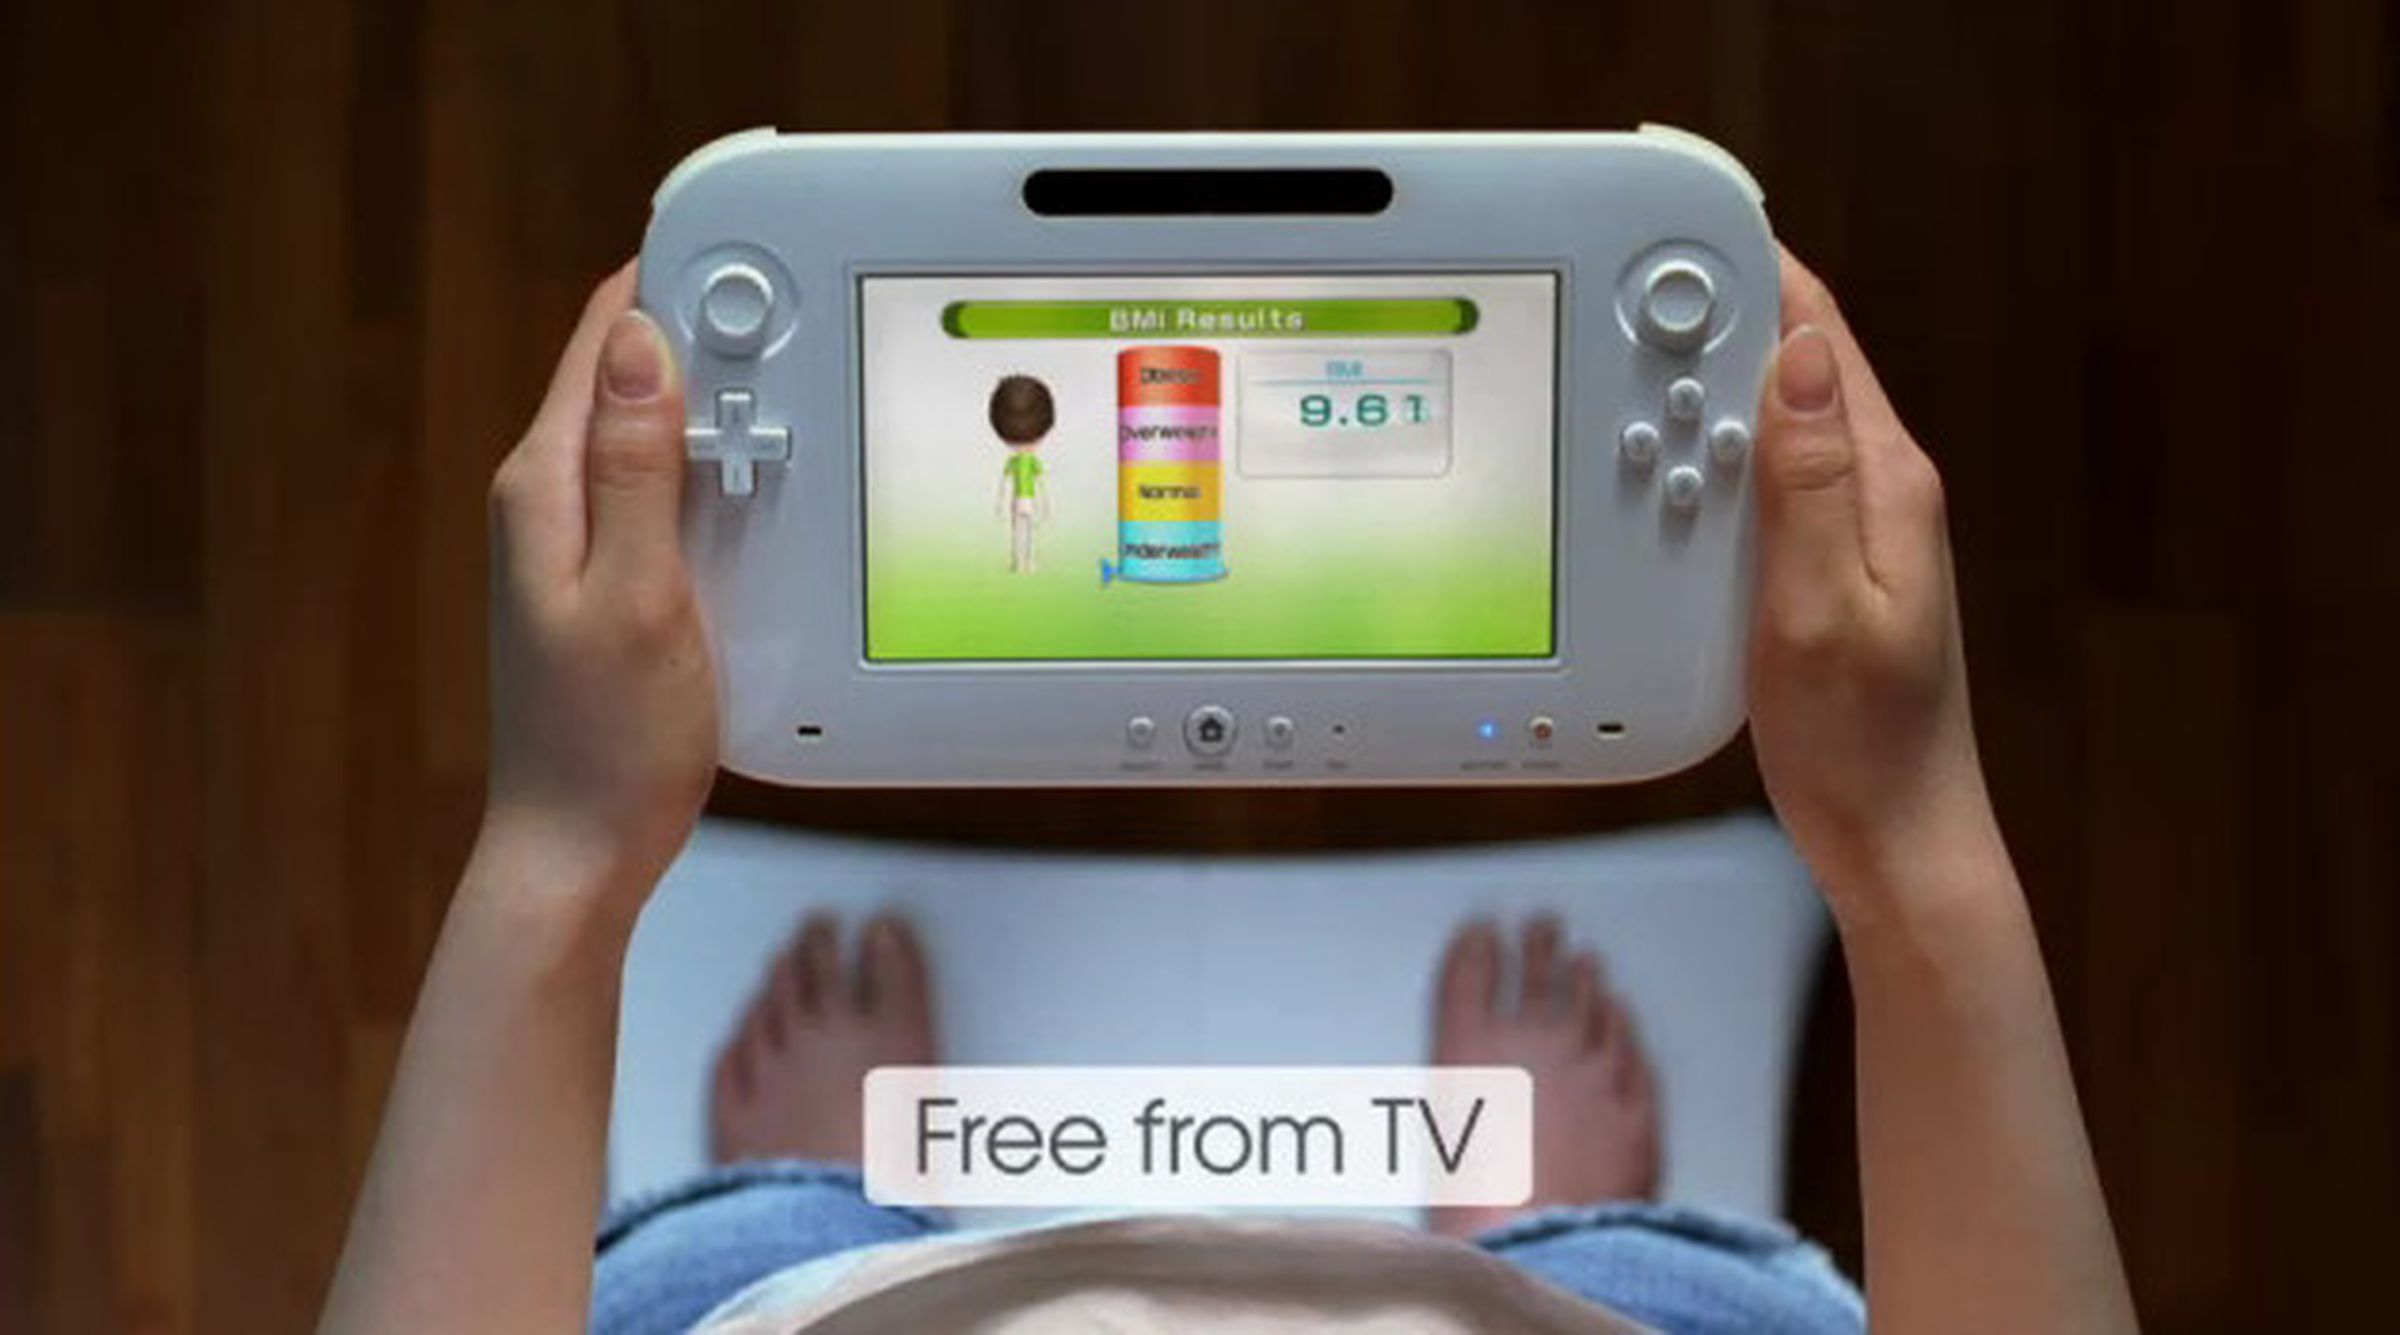 Wii U console officially revealed at Nintendo's pre-E3 press conference